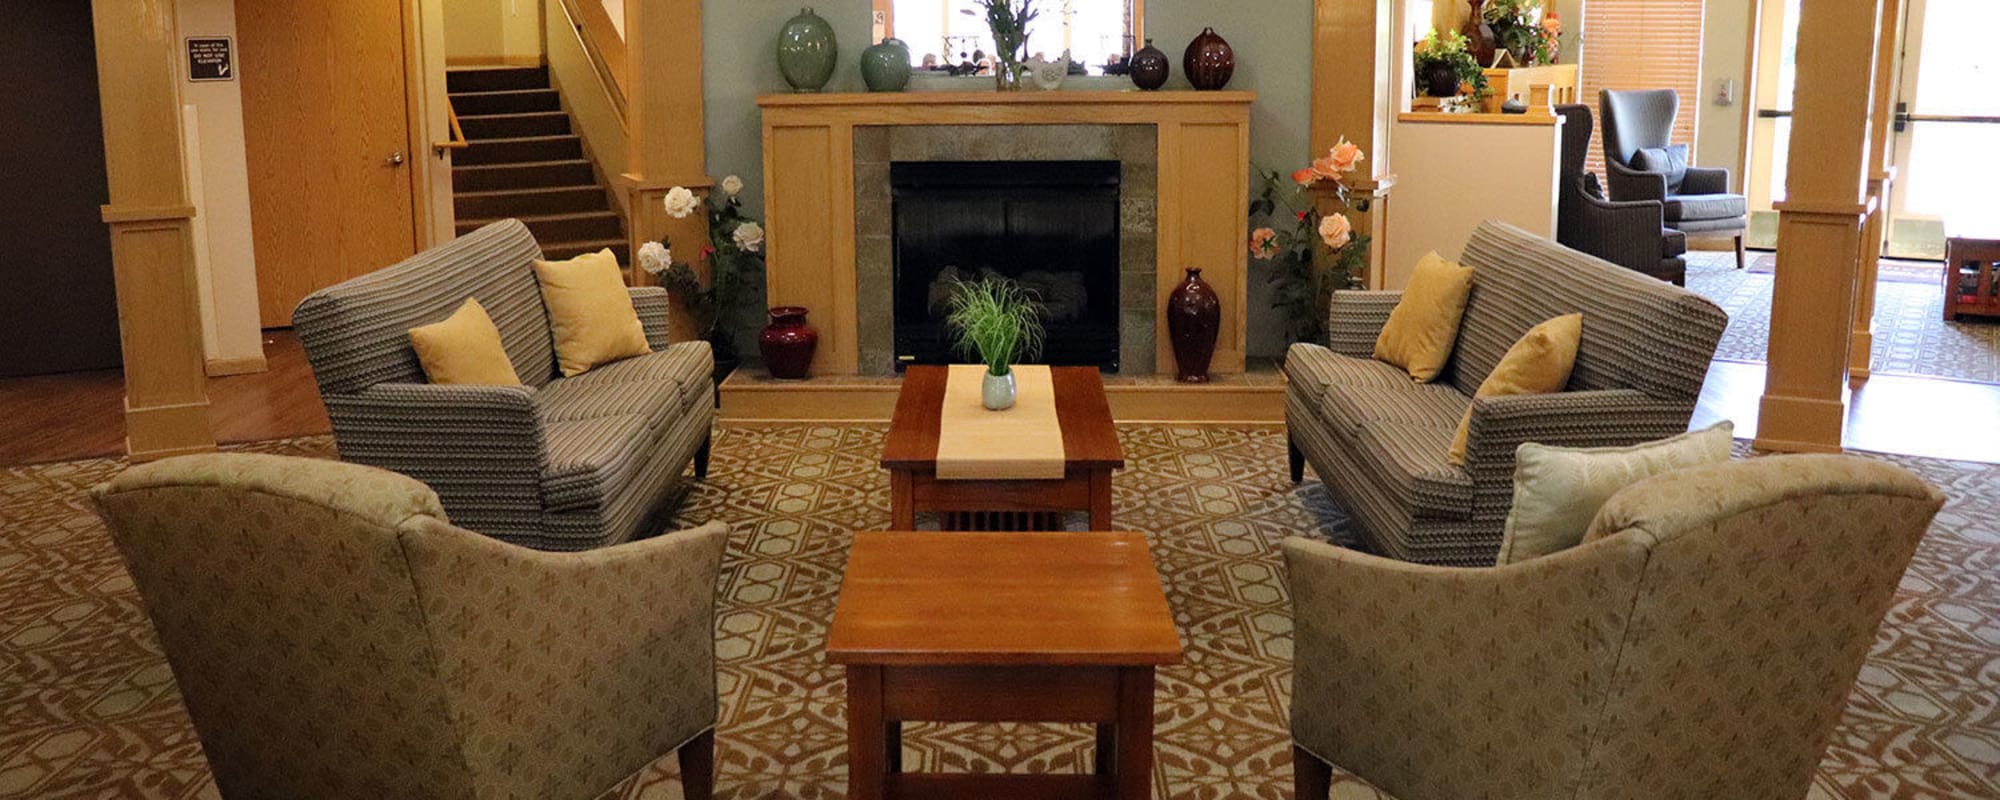 Cheerful lounge seating complete with wood accents and fireplace in upscale senior living facility at The Springs at Sunnyview in Salem, Oregon